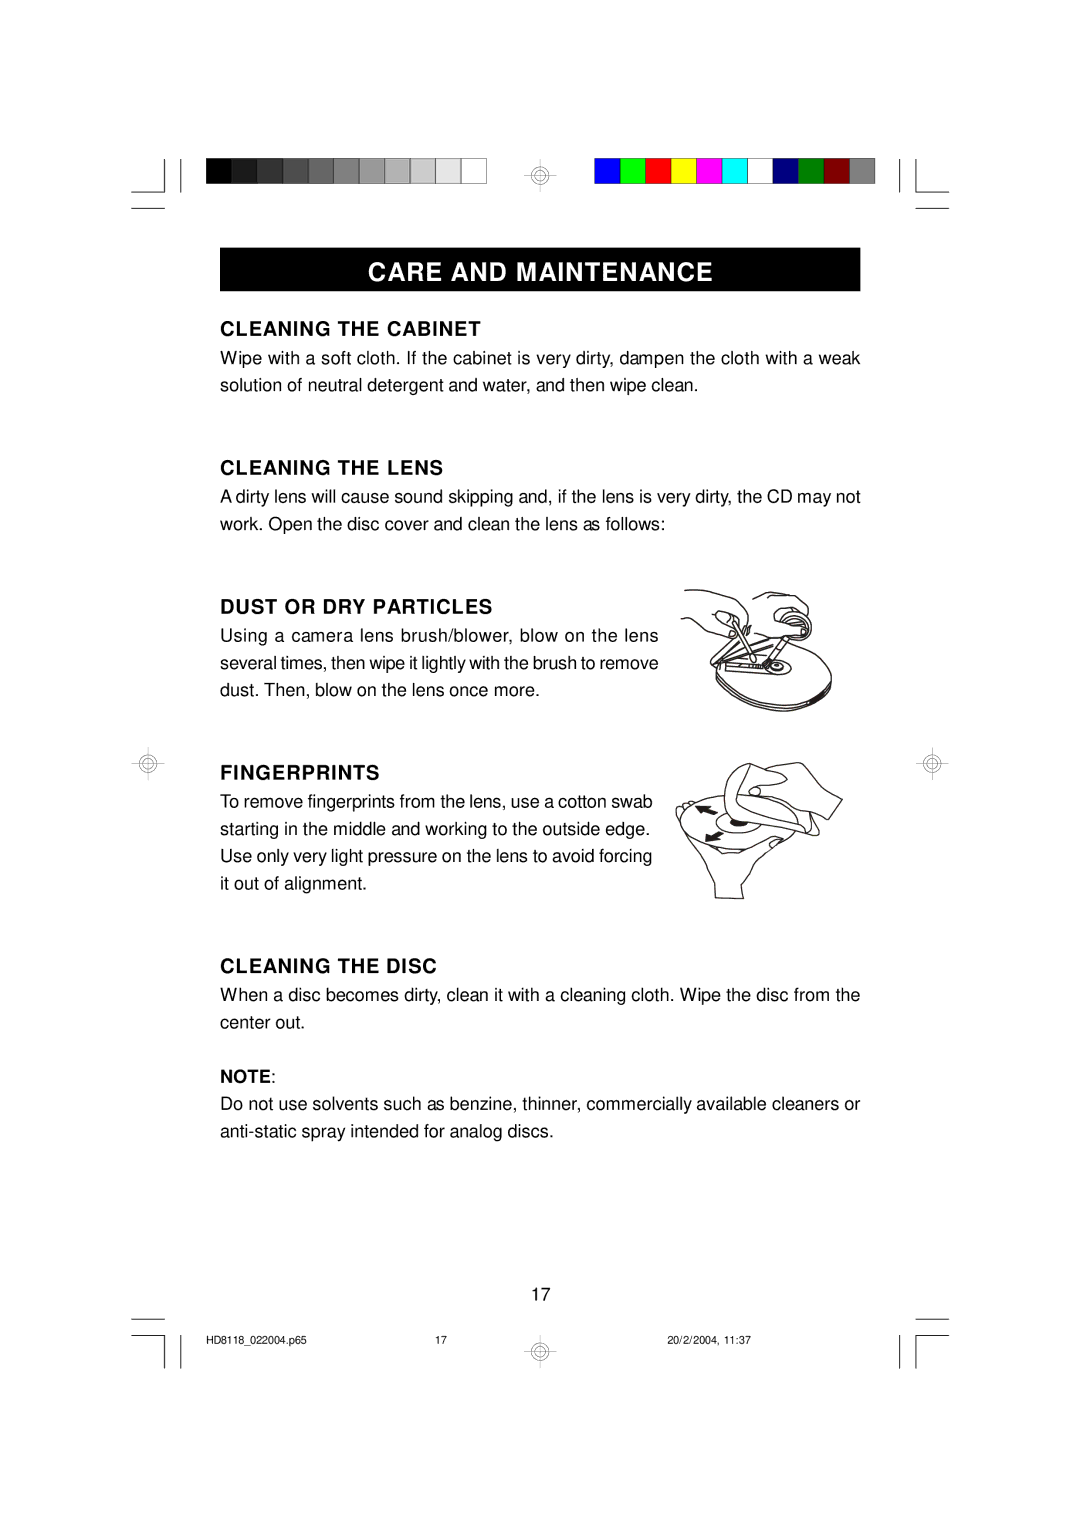 Emerson HD8118 owner manual Care and Maintenance, Cleaning the Cabinet 